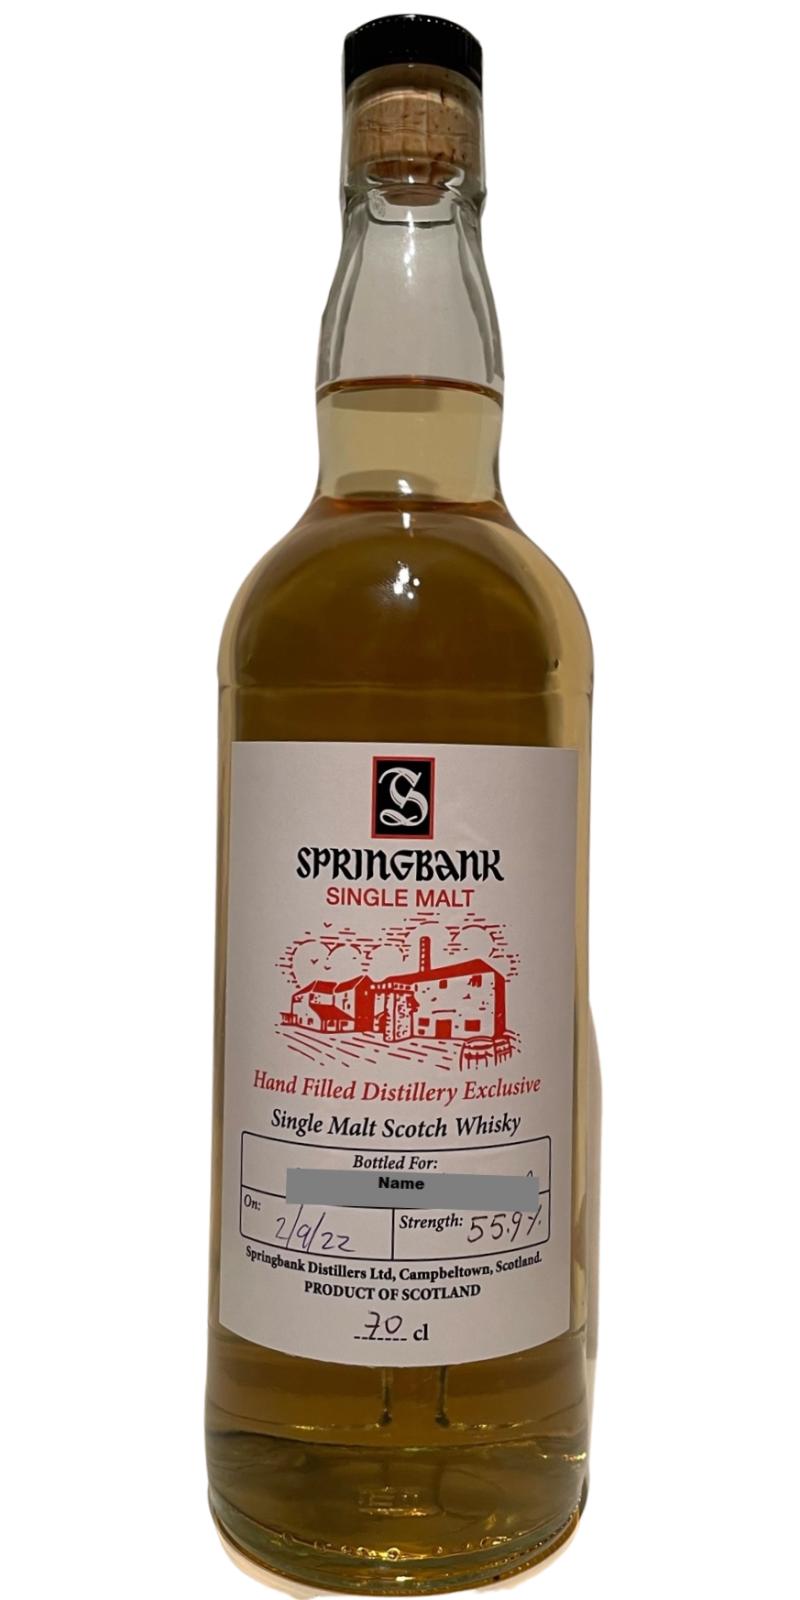 Springbank Hand Filled Distillery Exclusive 55.9% 700ml